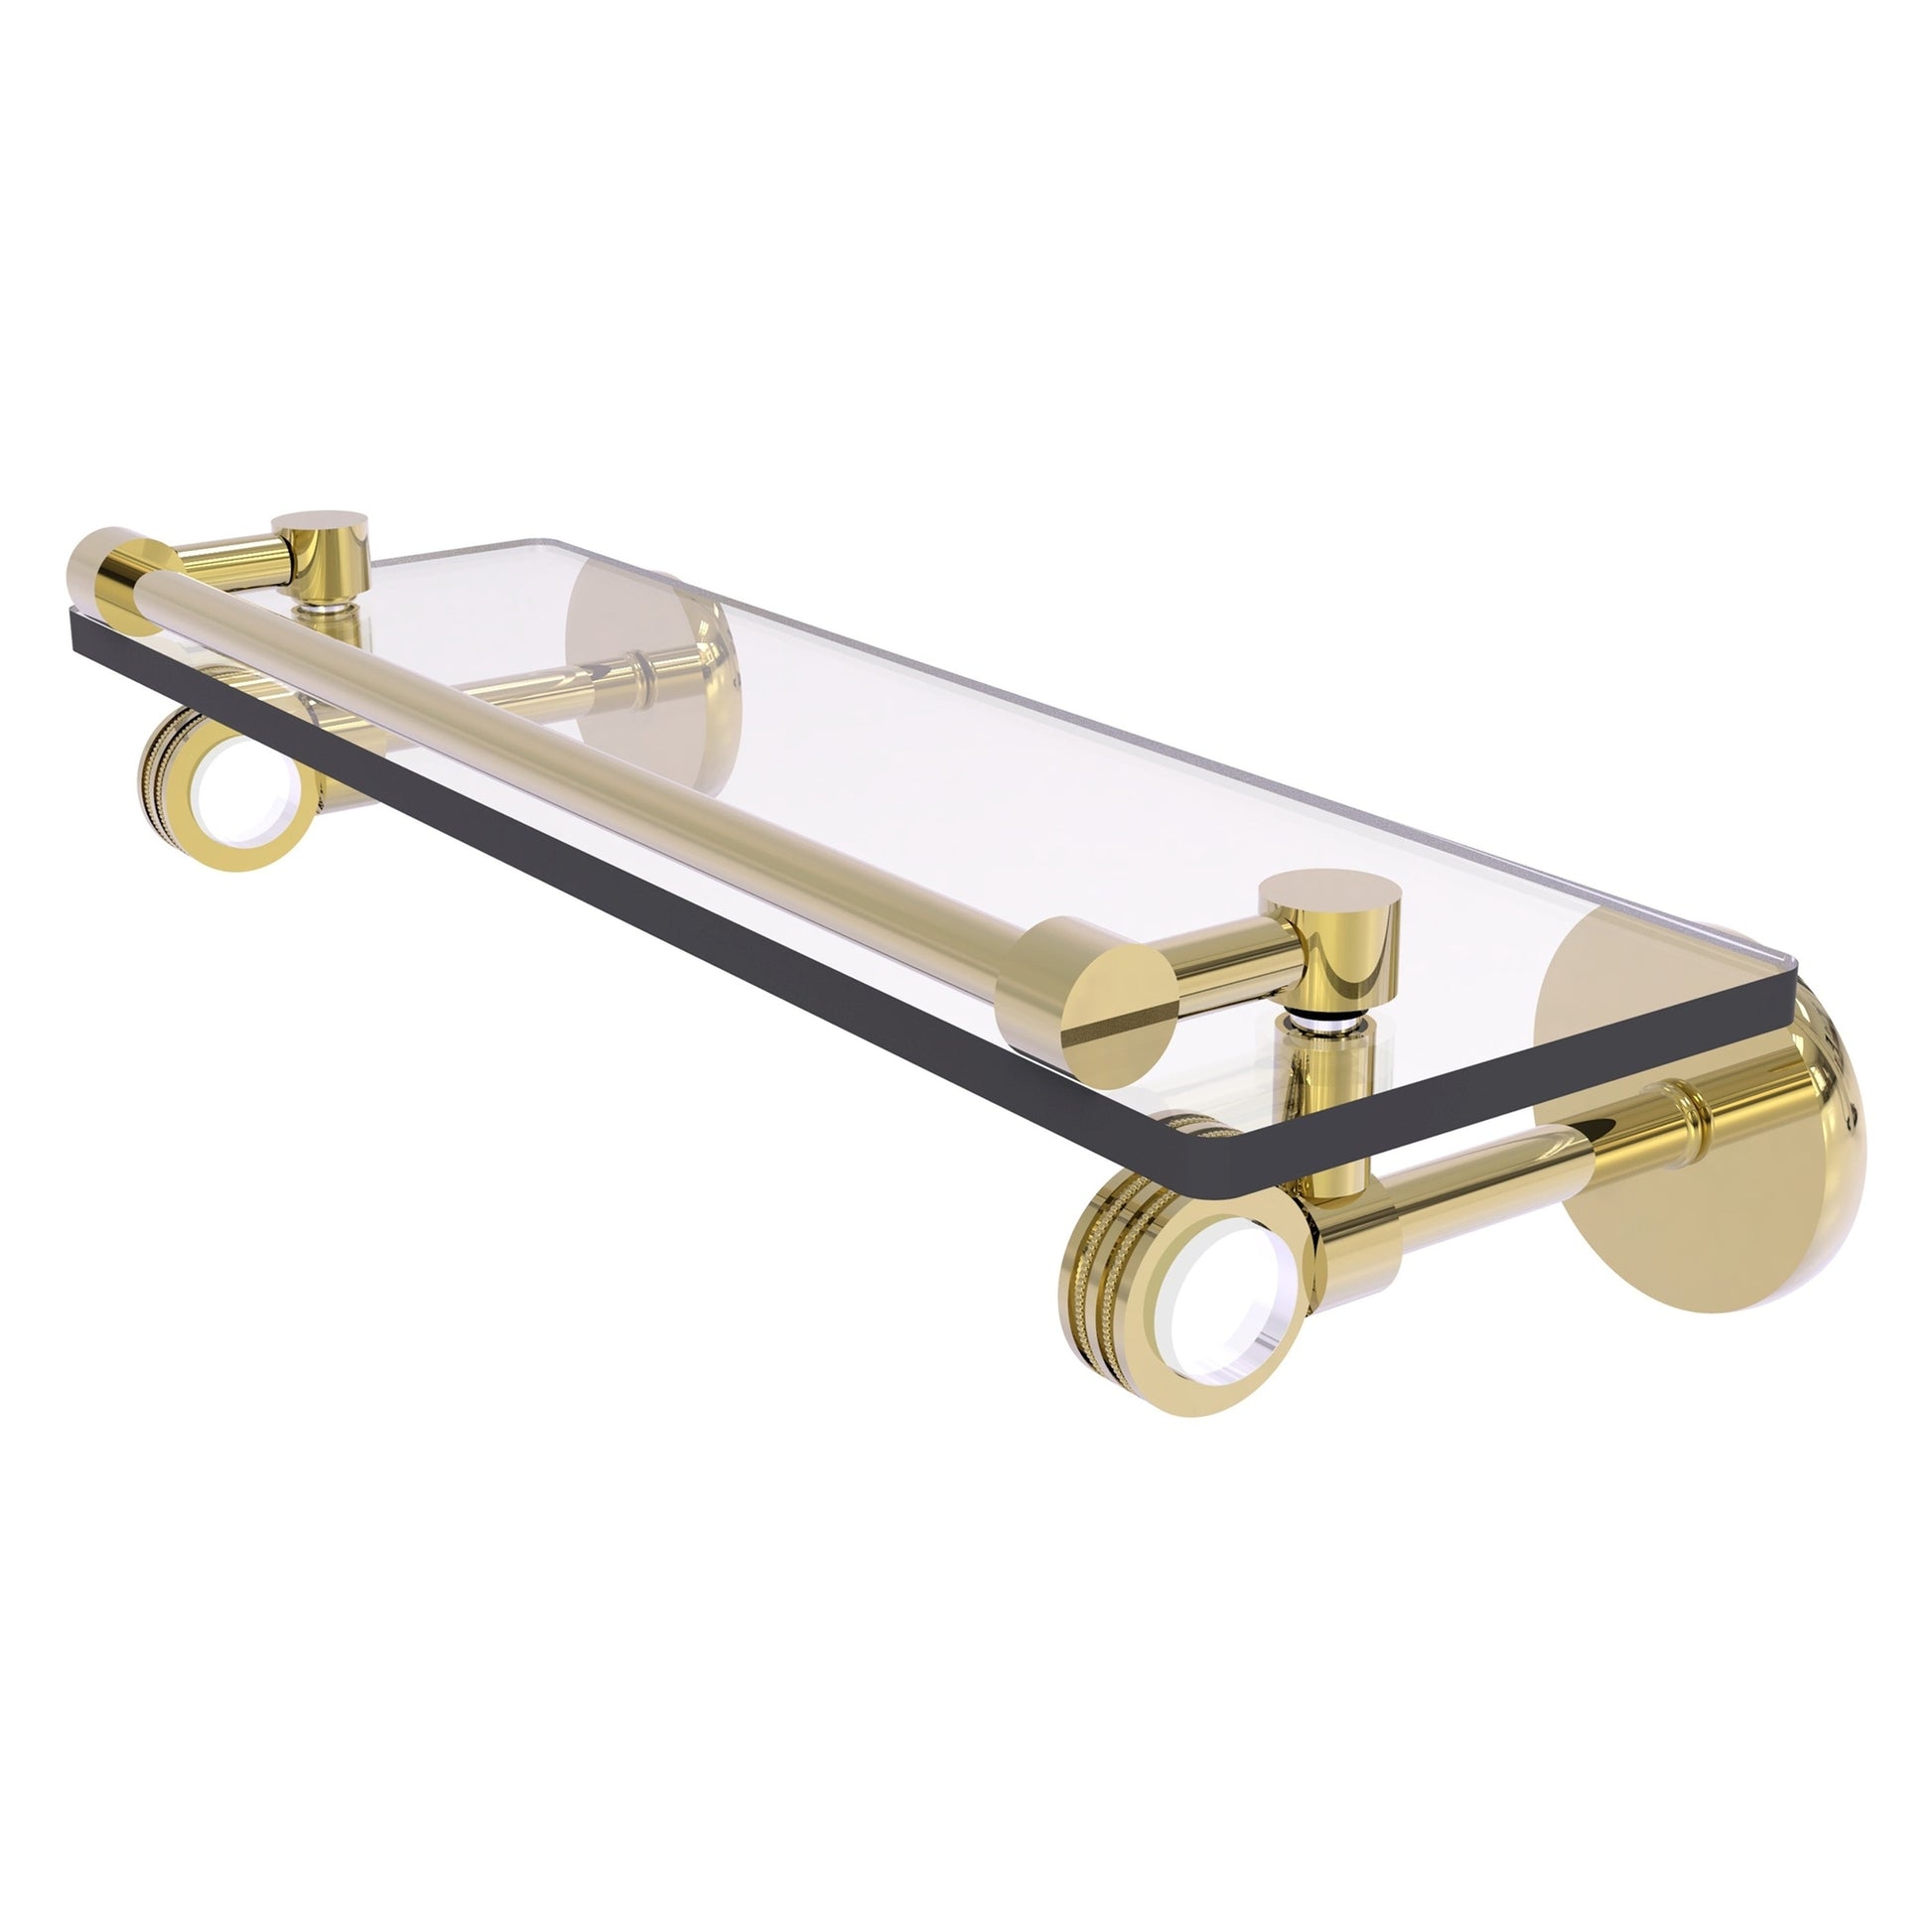 Allied Brass Que New Satin Brass Wall Mount Tempered Glass Bathroom Shelf  with Gallery Rail